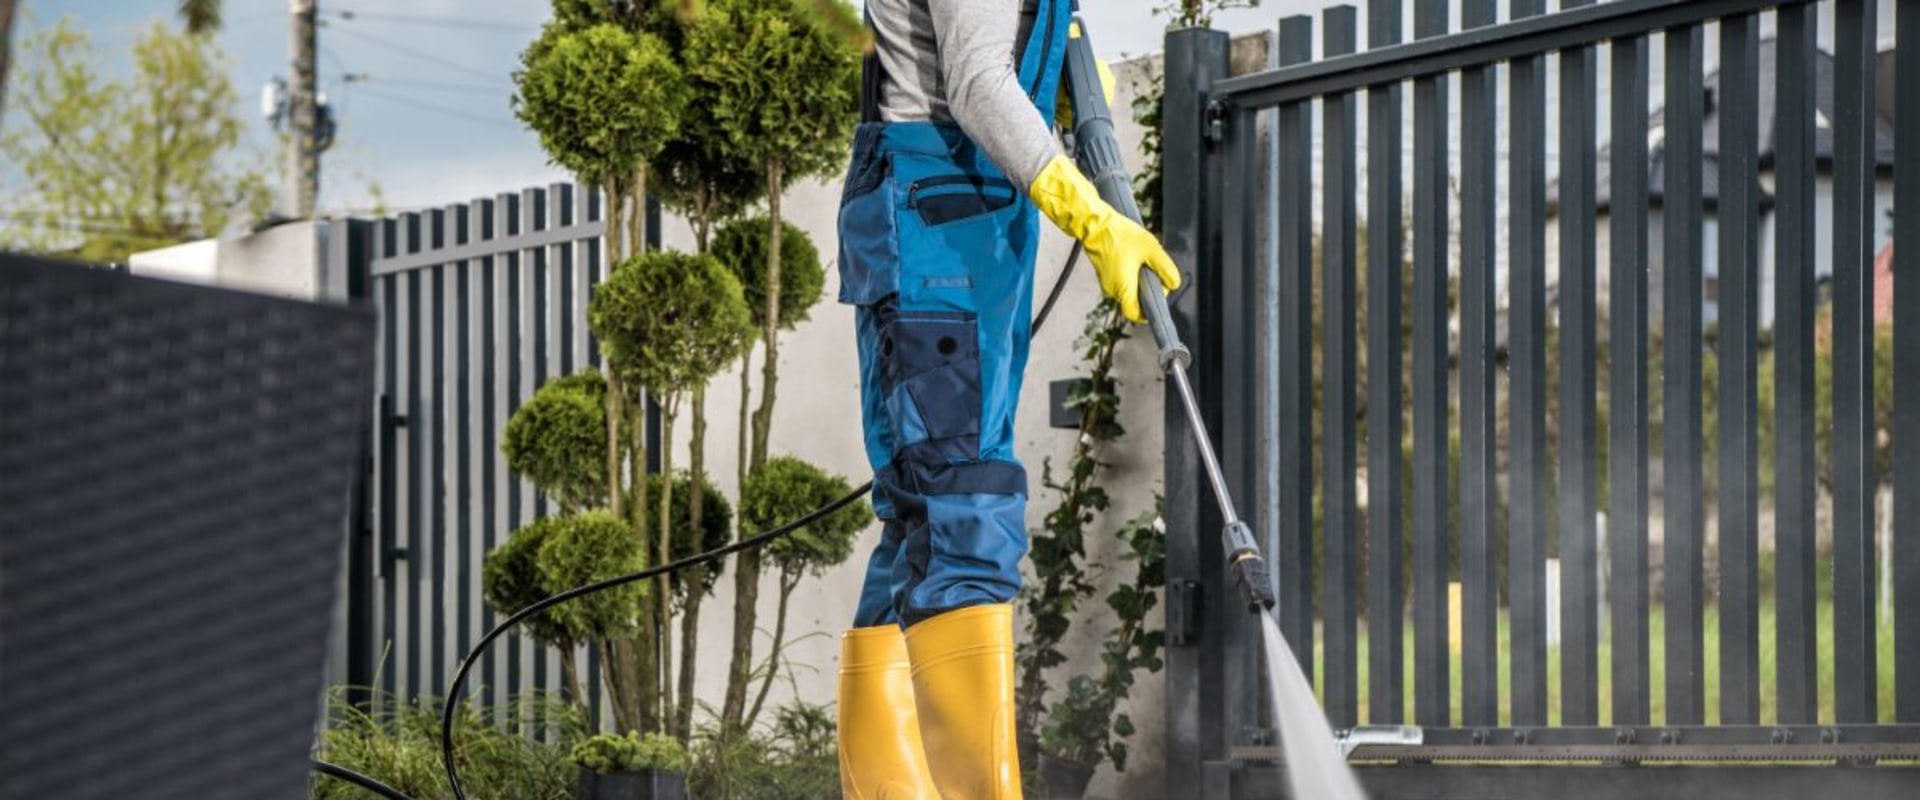 Pressure Washing with Detergents: All You Need to Know